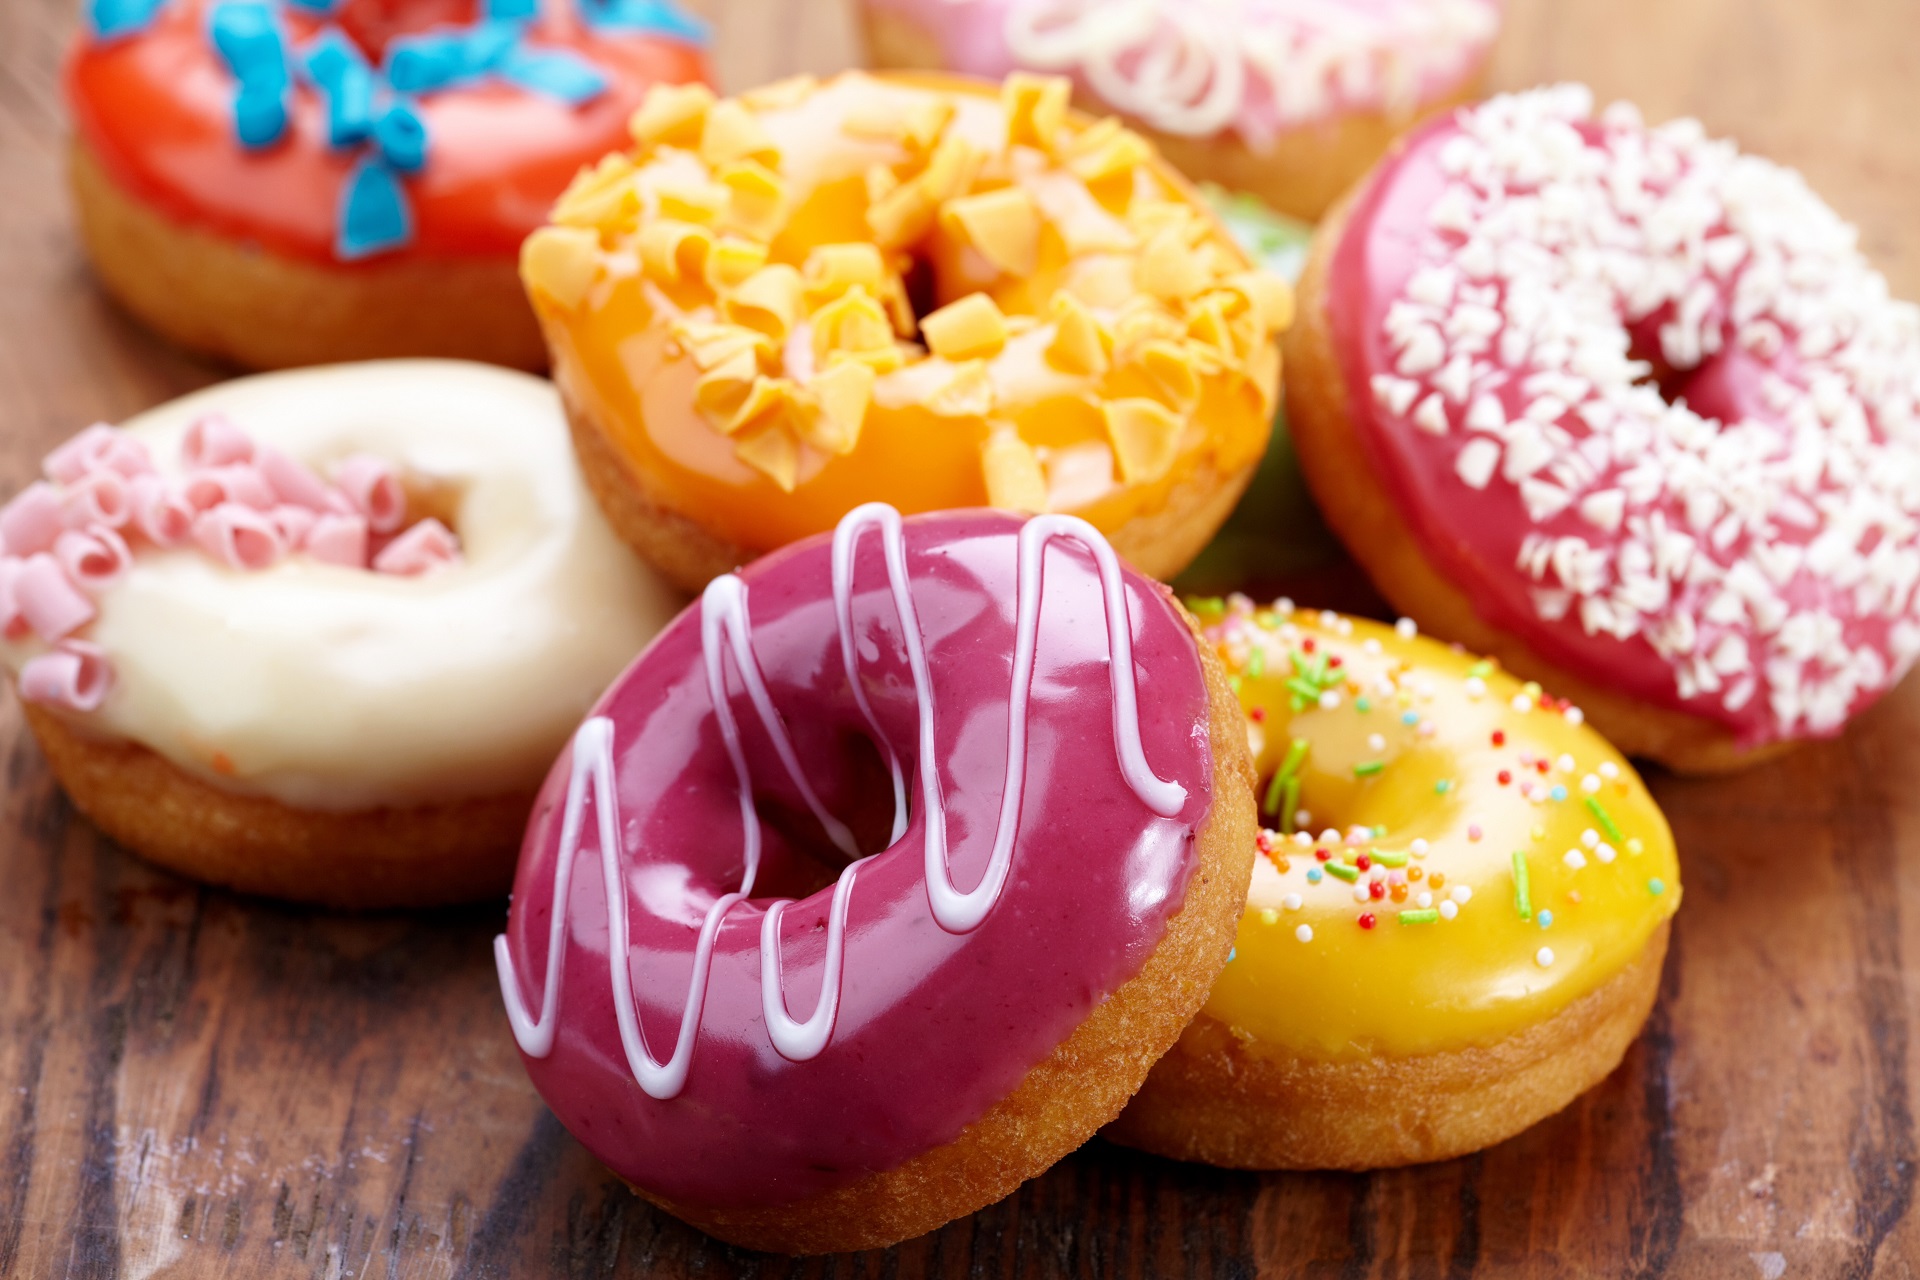 General 1920x1280 donut food closeup depth of field wooden surface colorful sweets